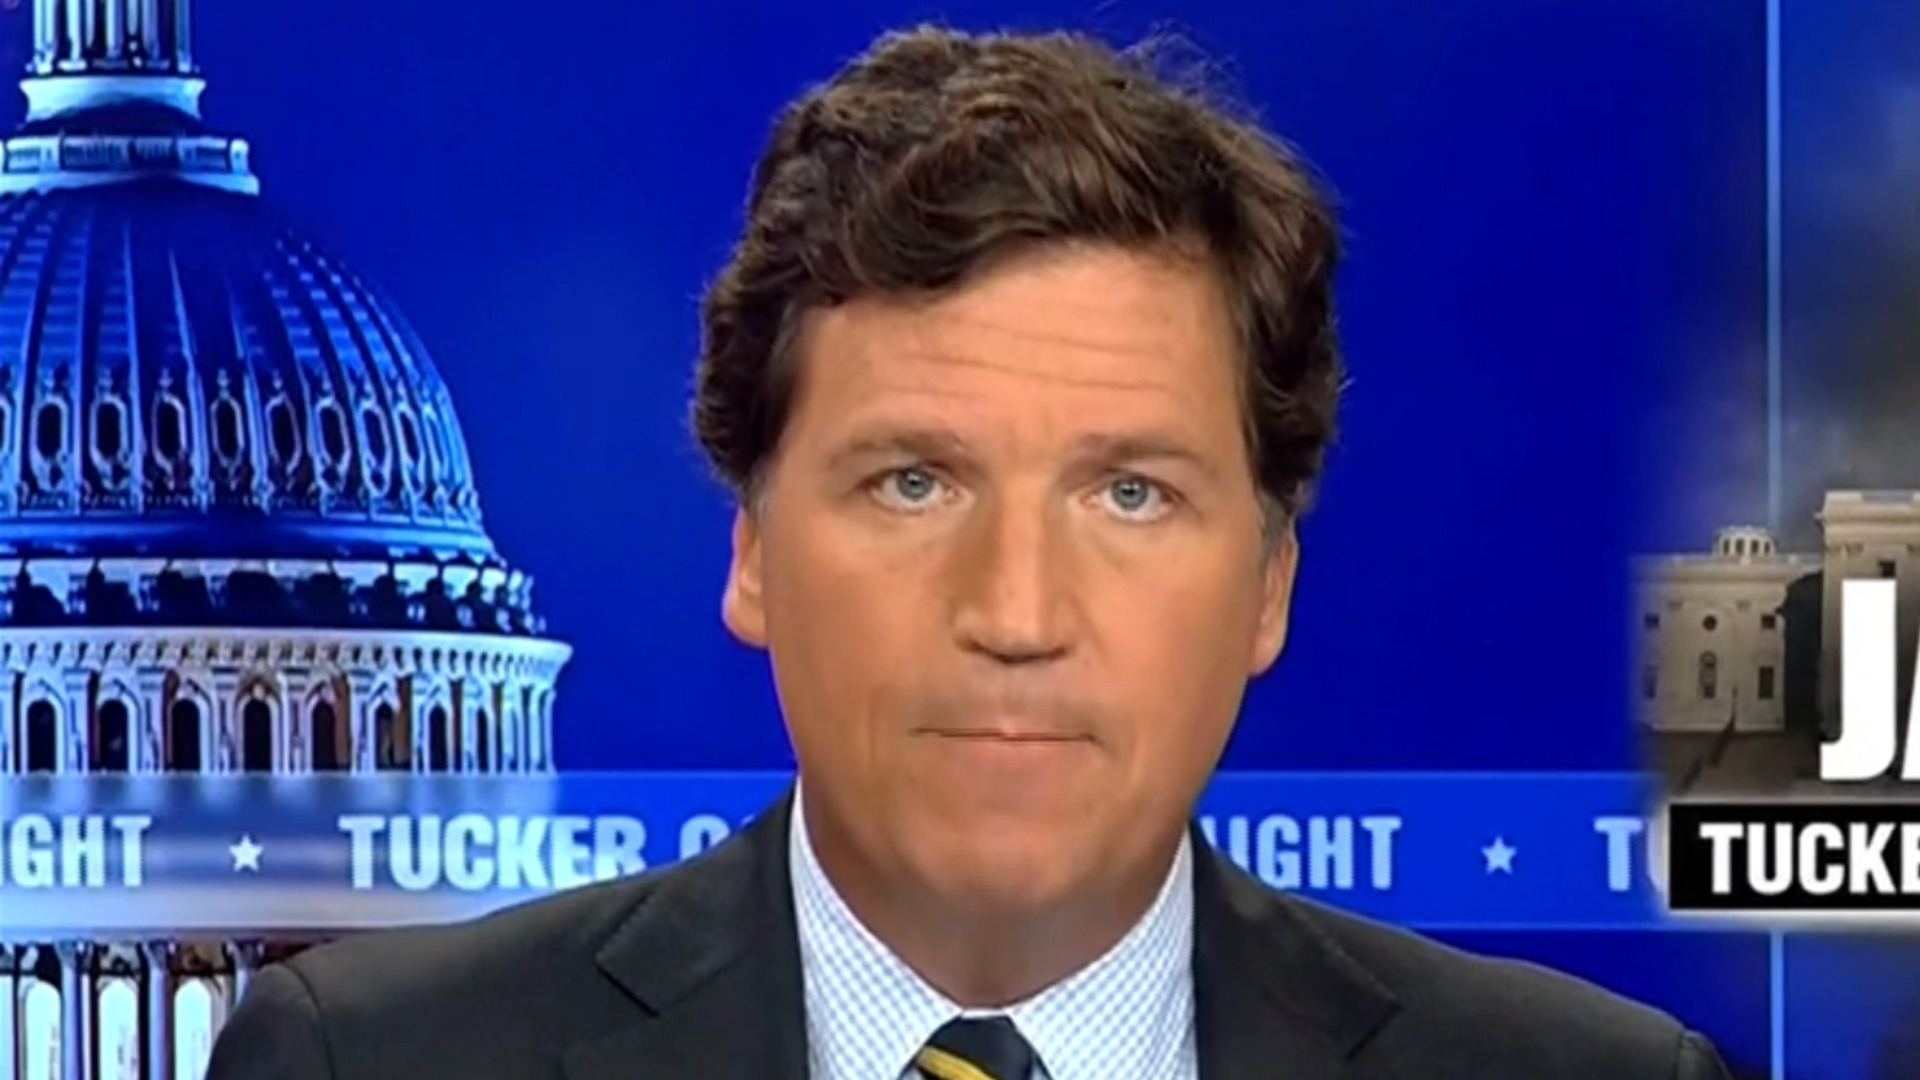 Watch Cbs Evening News Tucker Carlson Criticized For Jan Comments